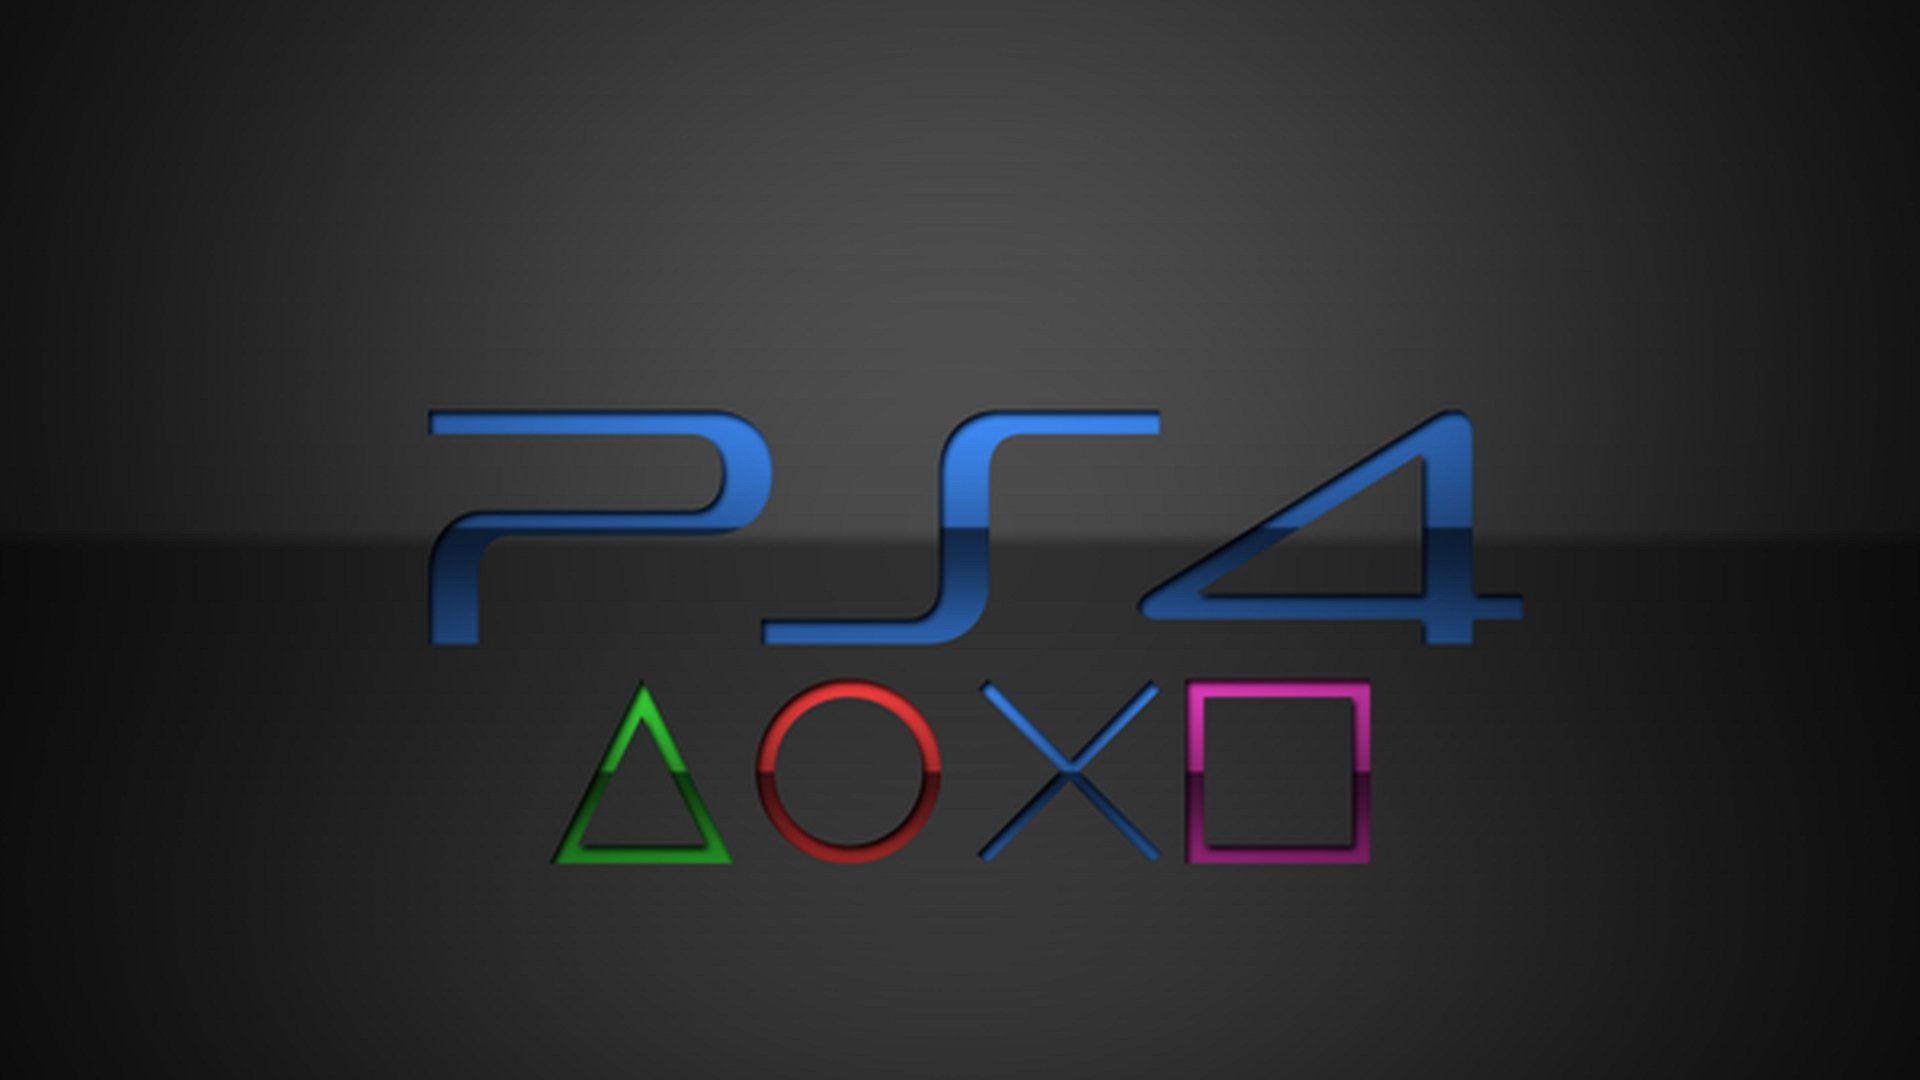 Ps4 Logo Wallpapers posted by Zoey Mercado.